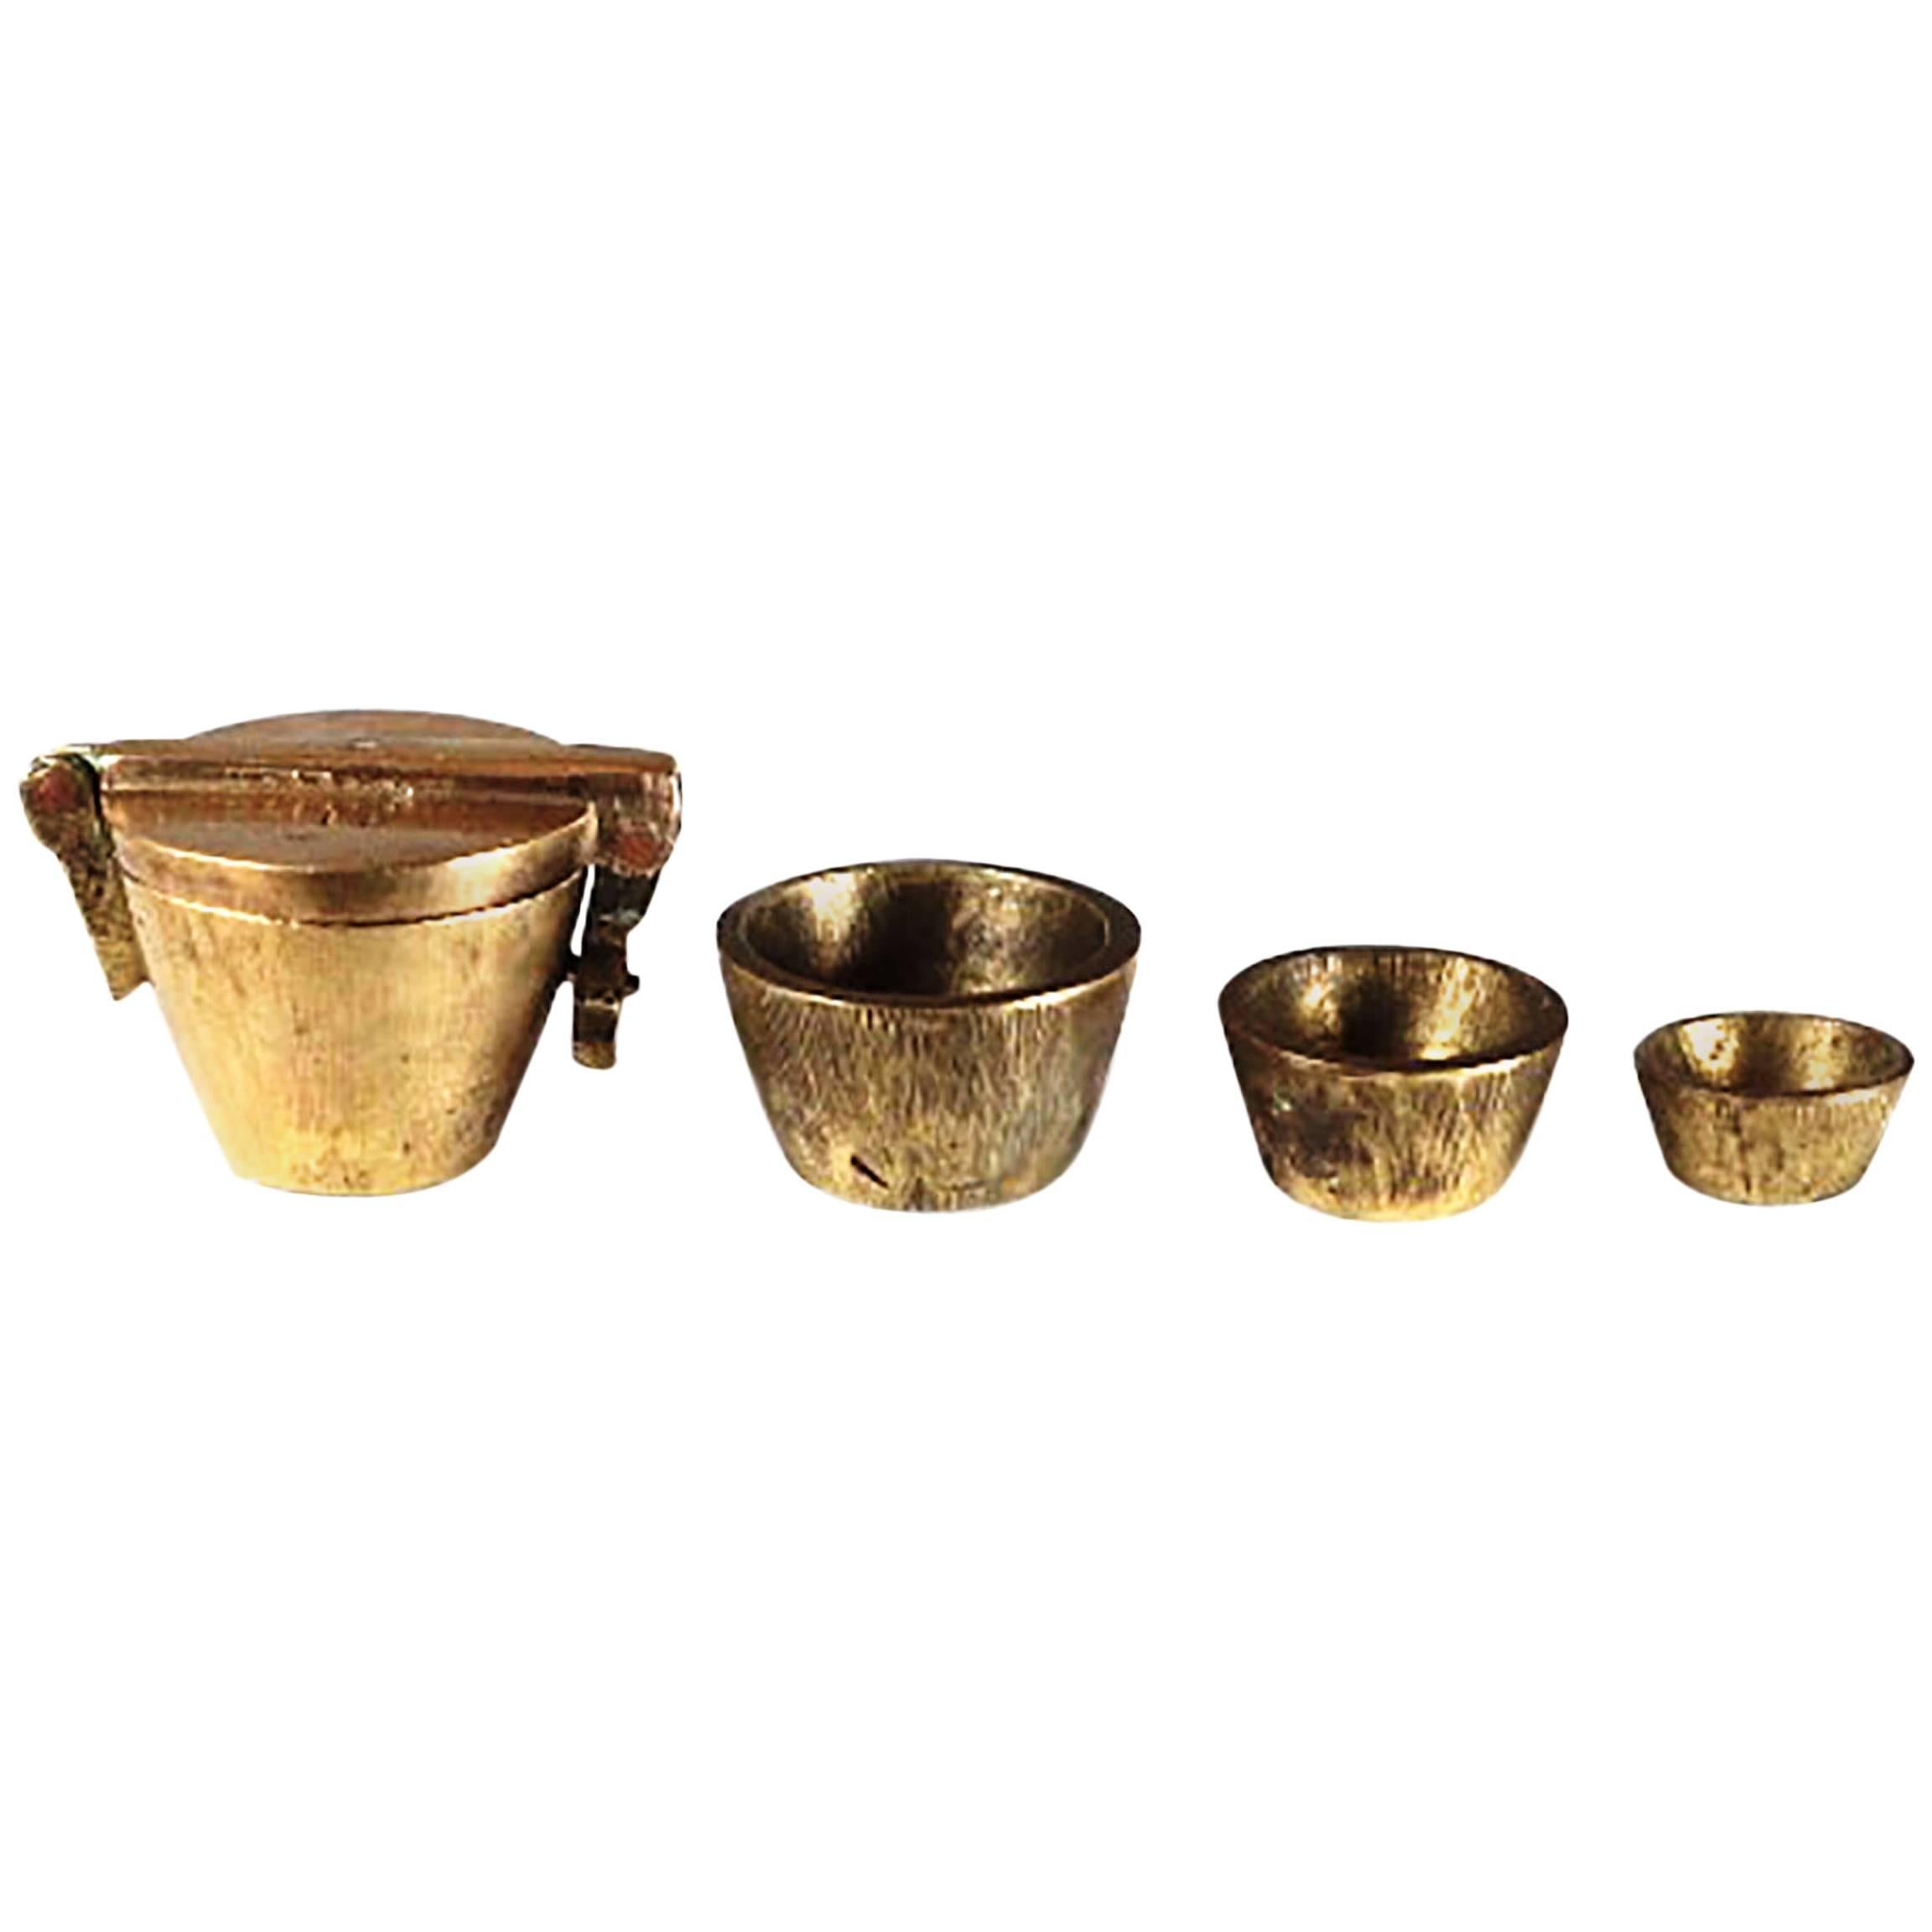 Early 19th Century Brass Apothecary Nesting Weights